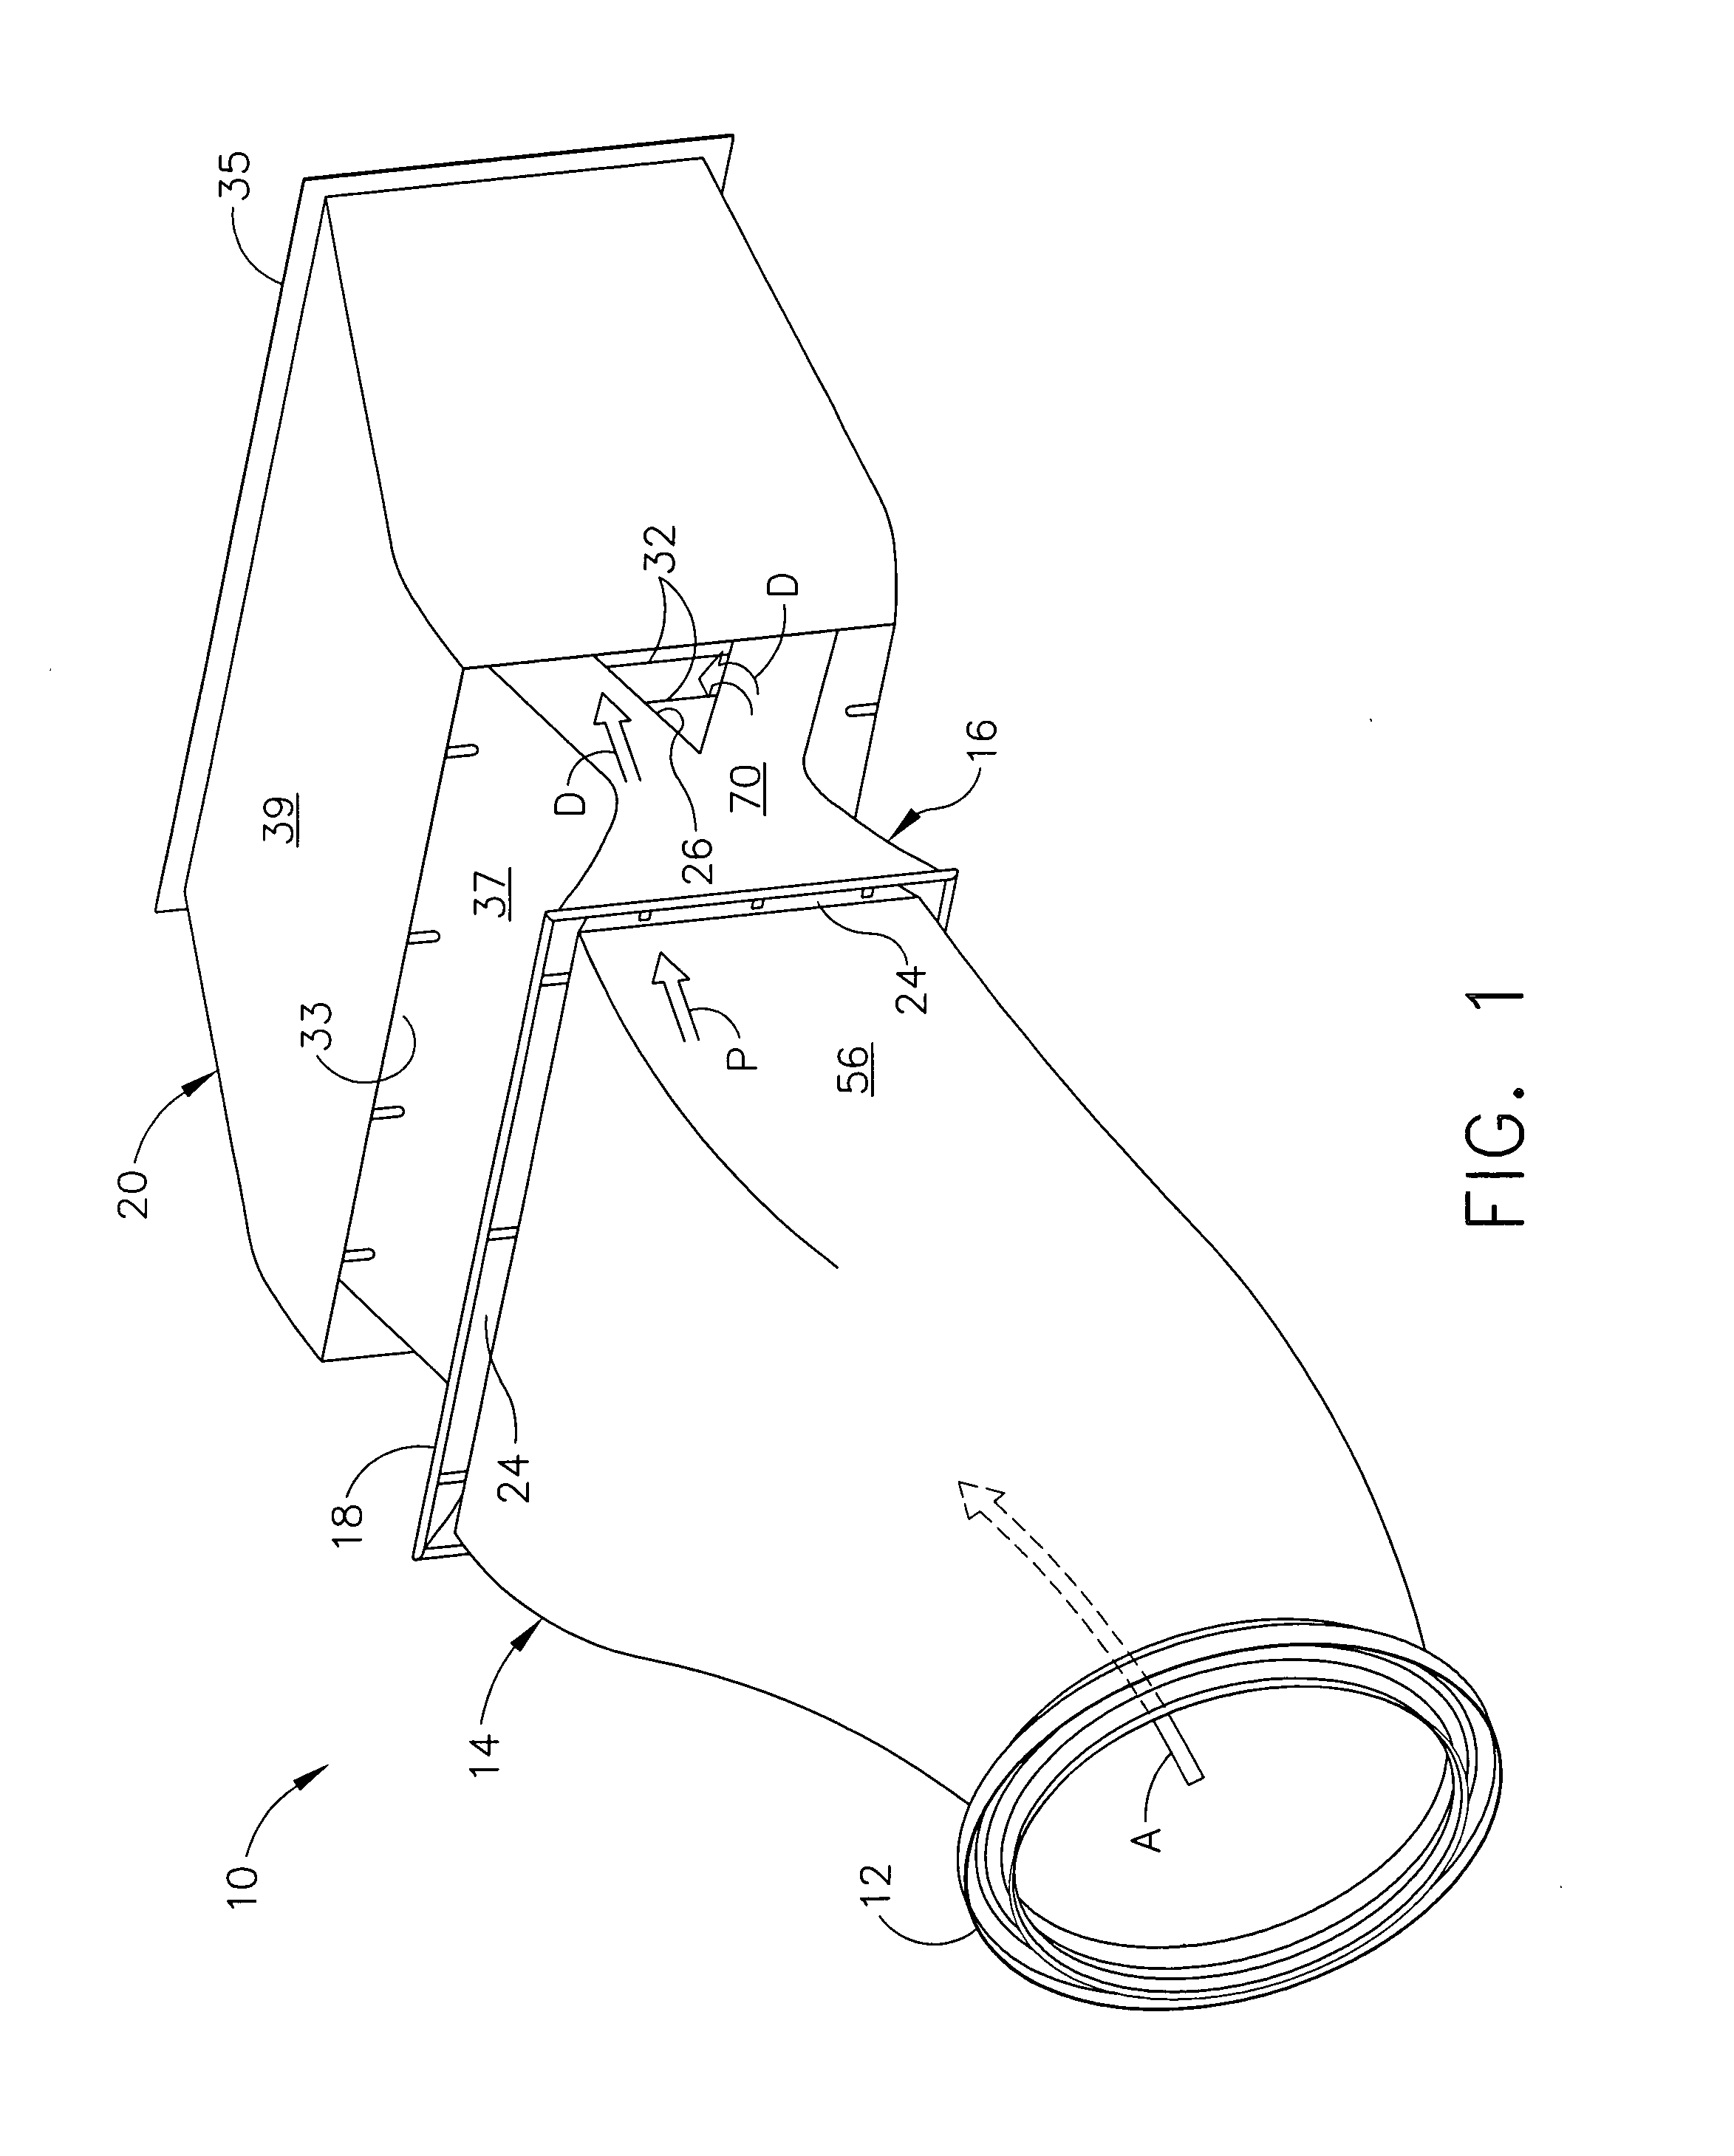 Infrared suppressor apparatus and method